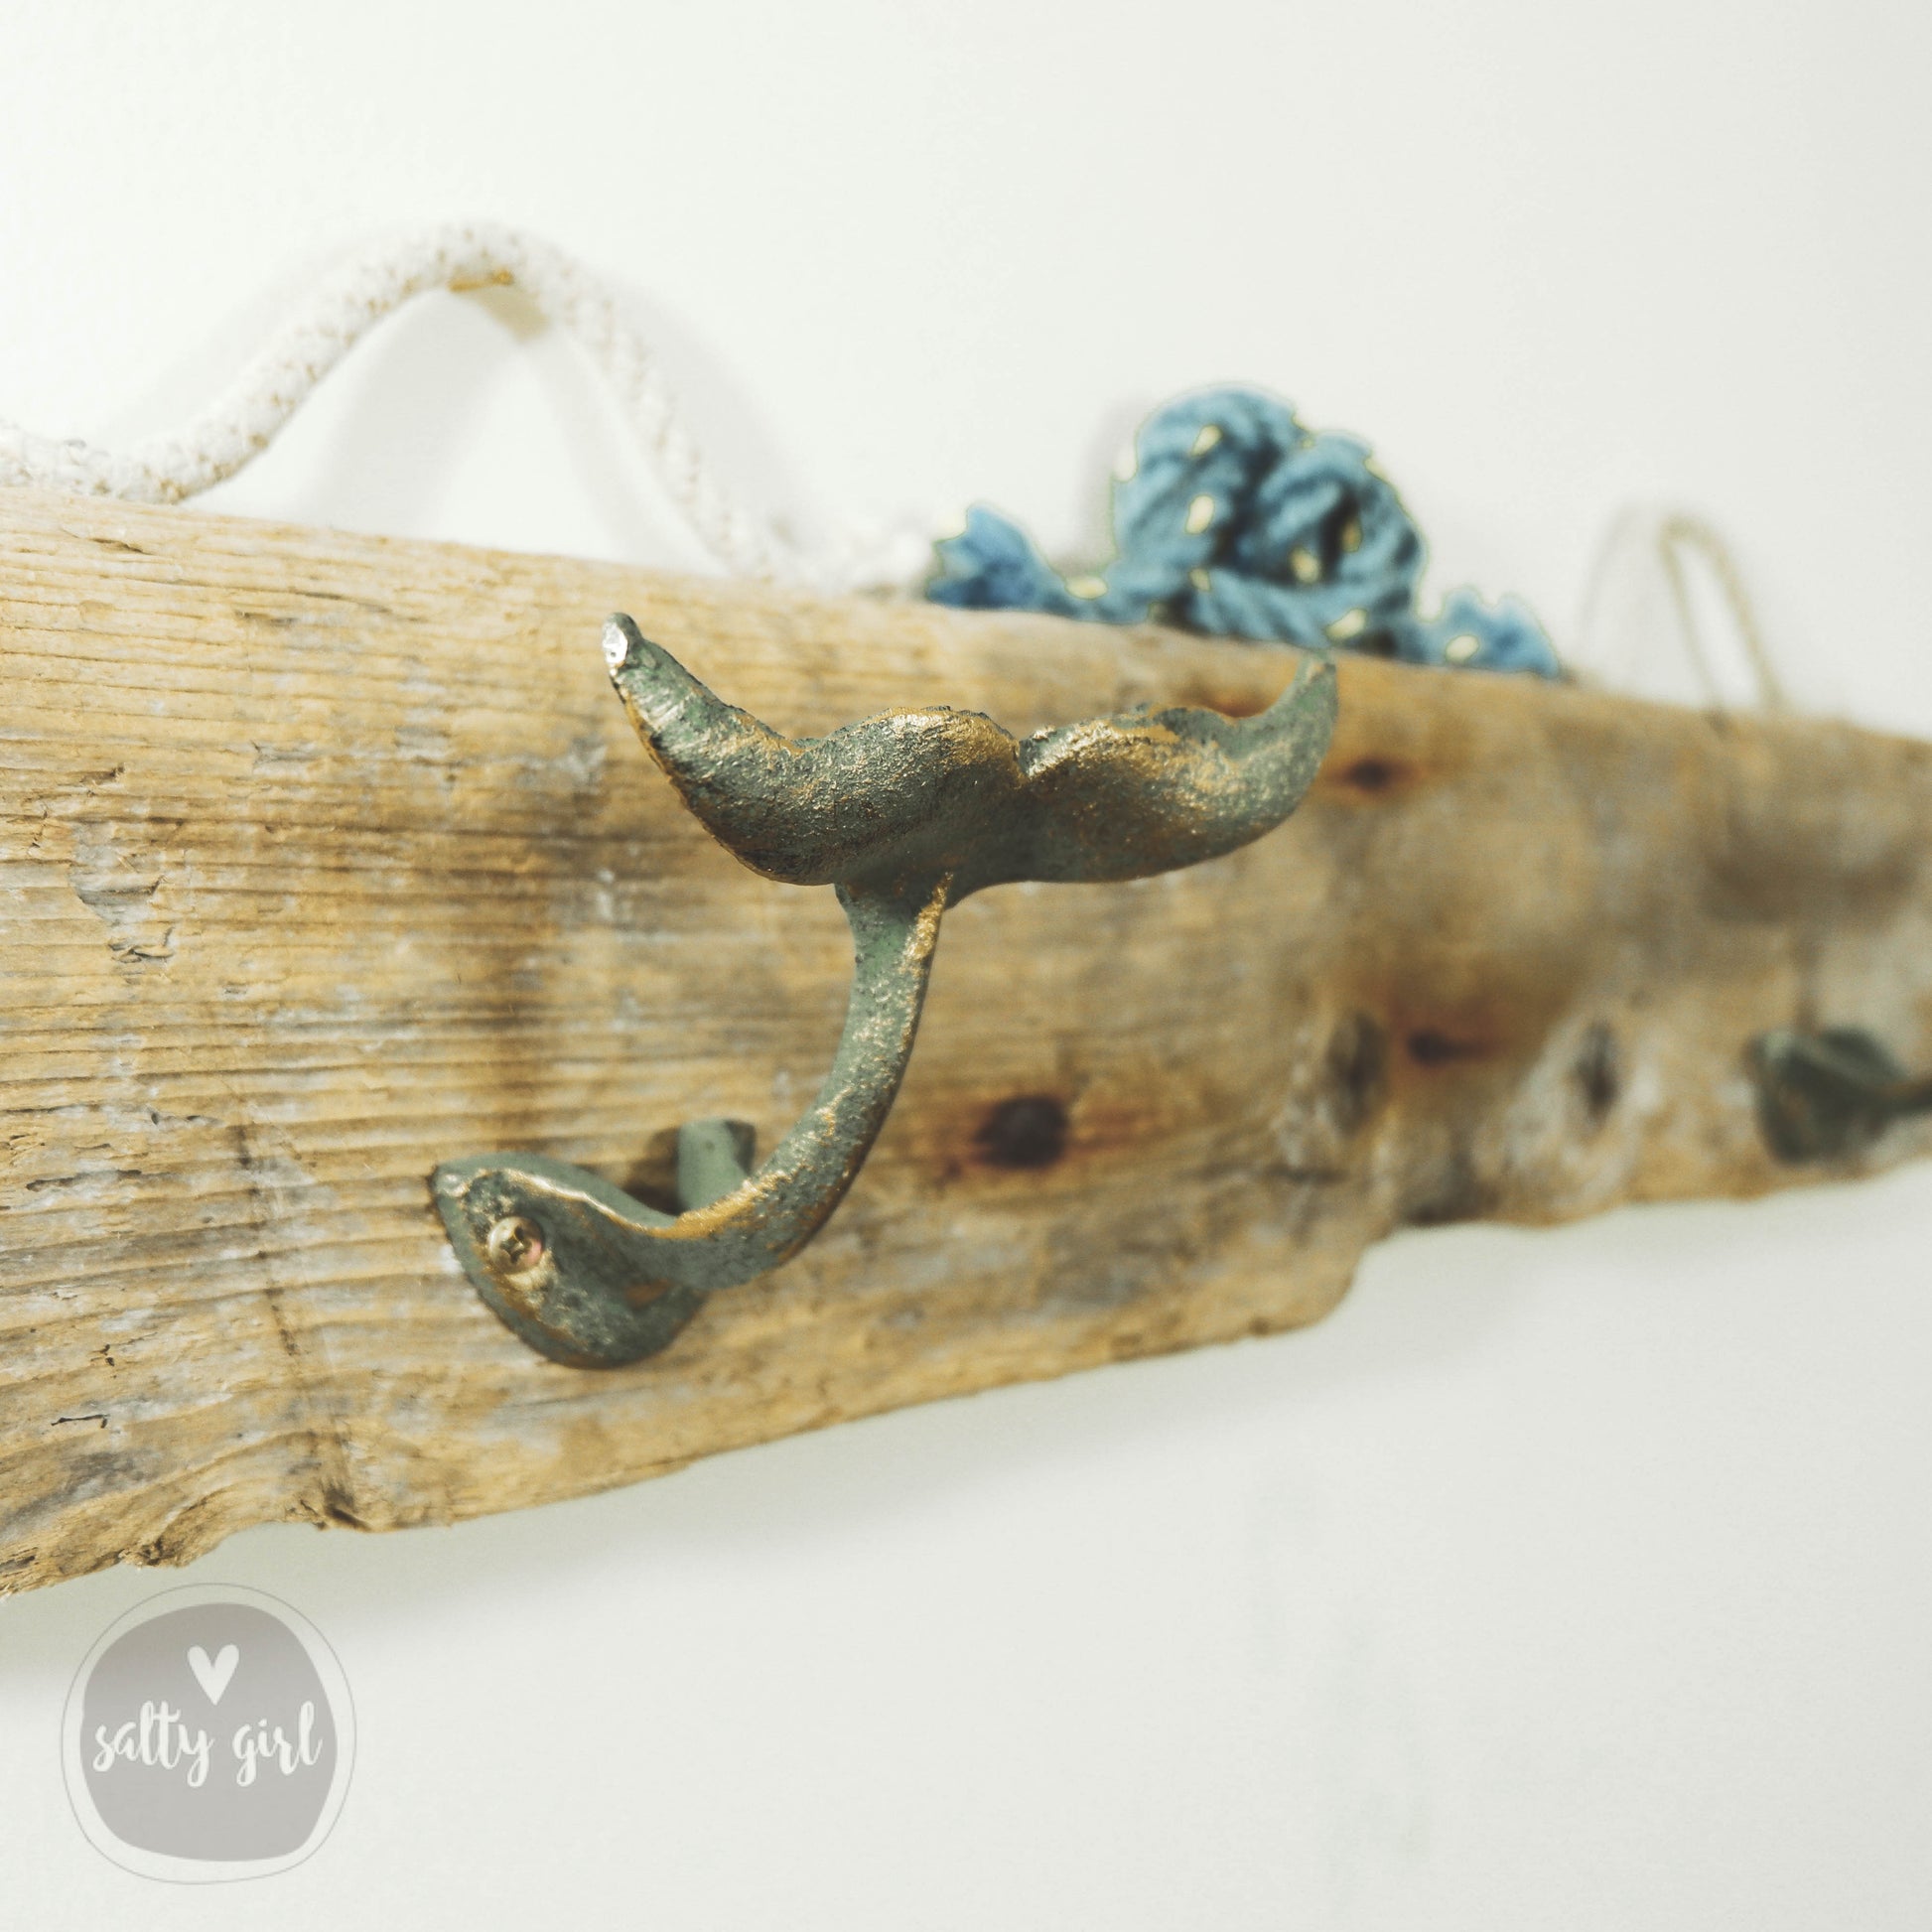 WALL HOOK - Gold Whale Tail - Resin - Key Coat Bag Towel